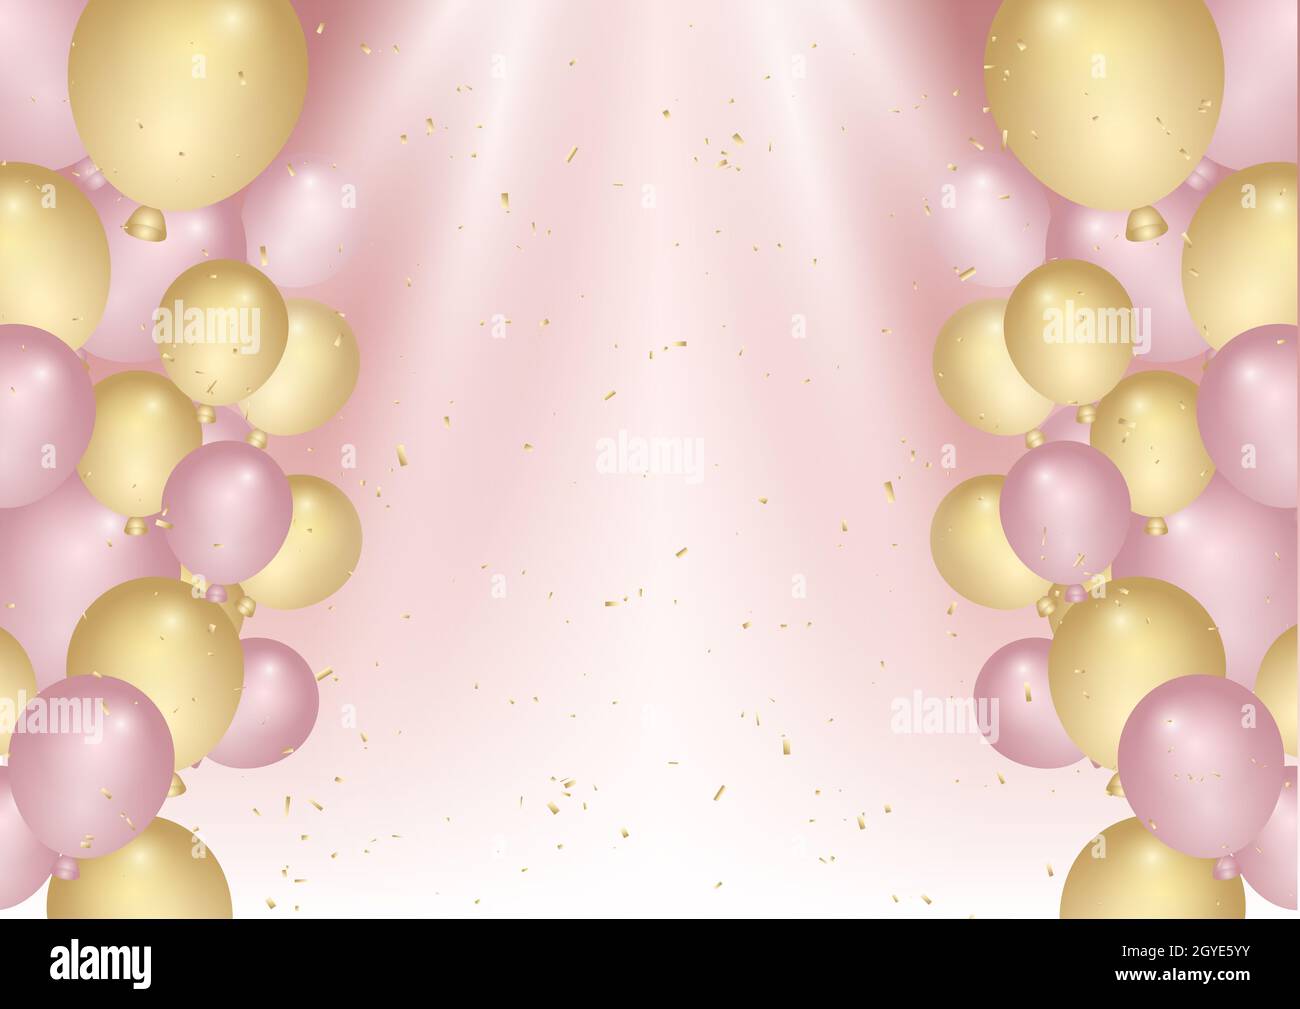 Birthday celebration background with confetti and pink and gold balloons  Stock Photo - Alamy